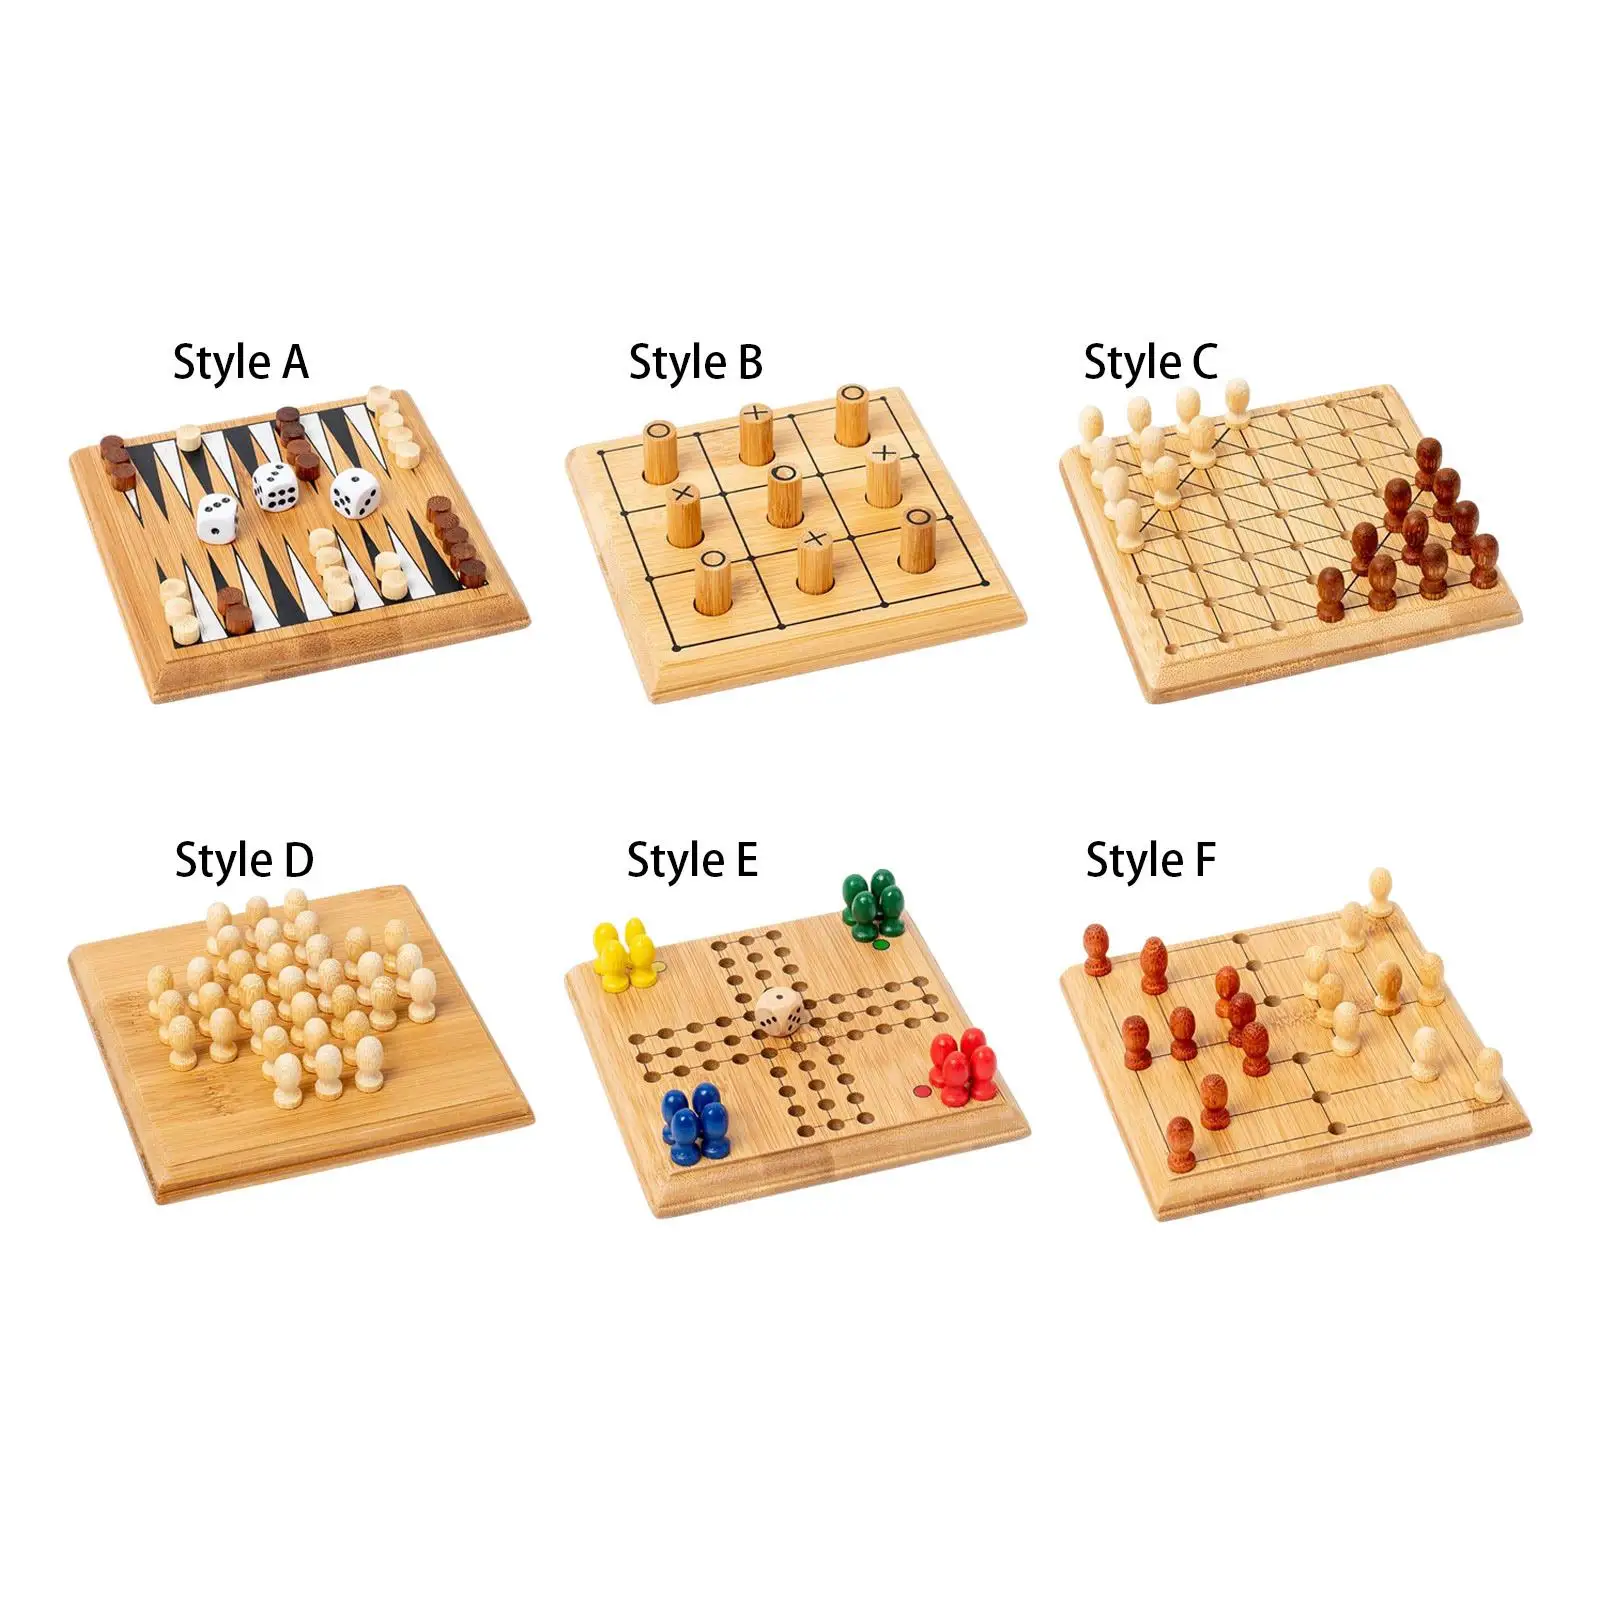 Portable Wooden Board Game with Playing Pieces and Accessories Educational Toys Logical Thinking Strategy Game for Party